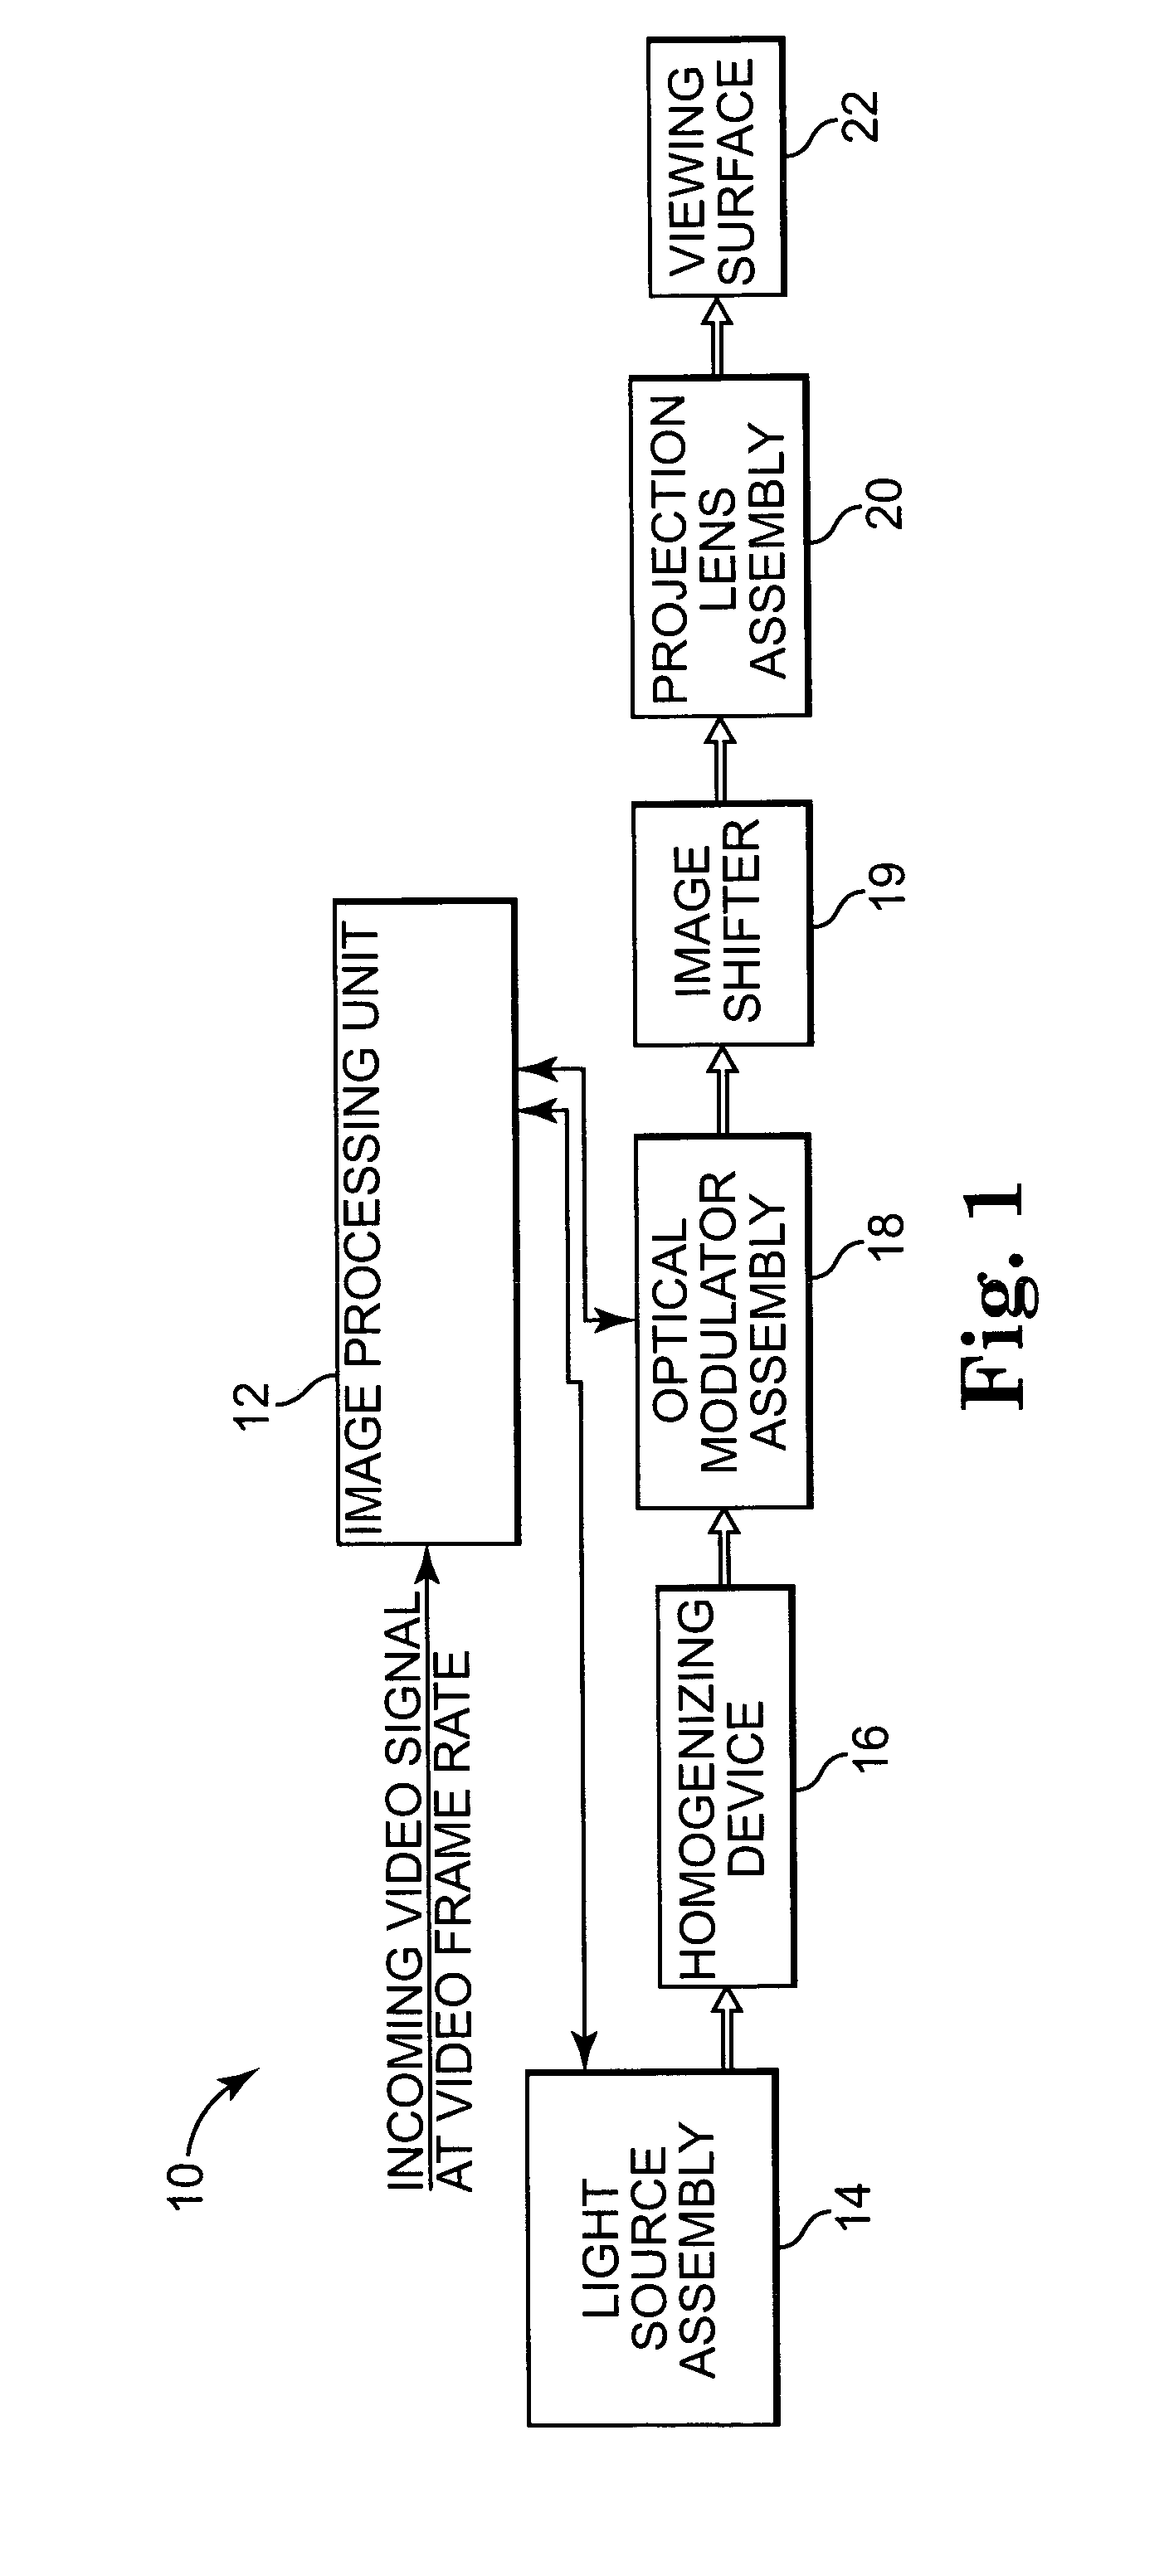 Image display system and method